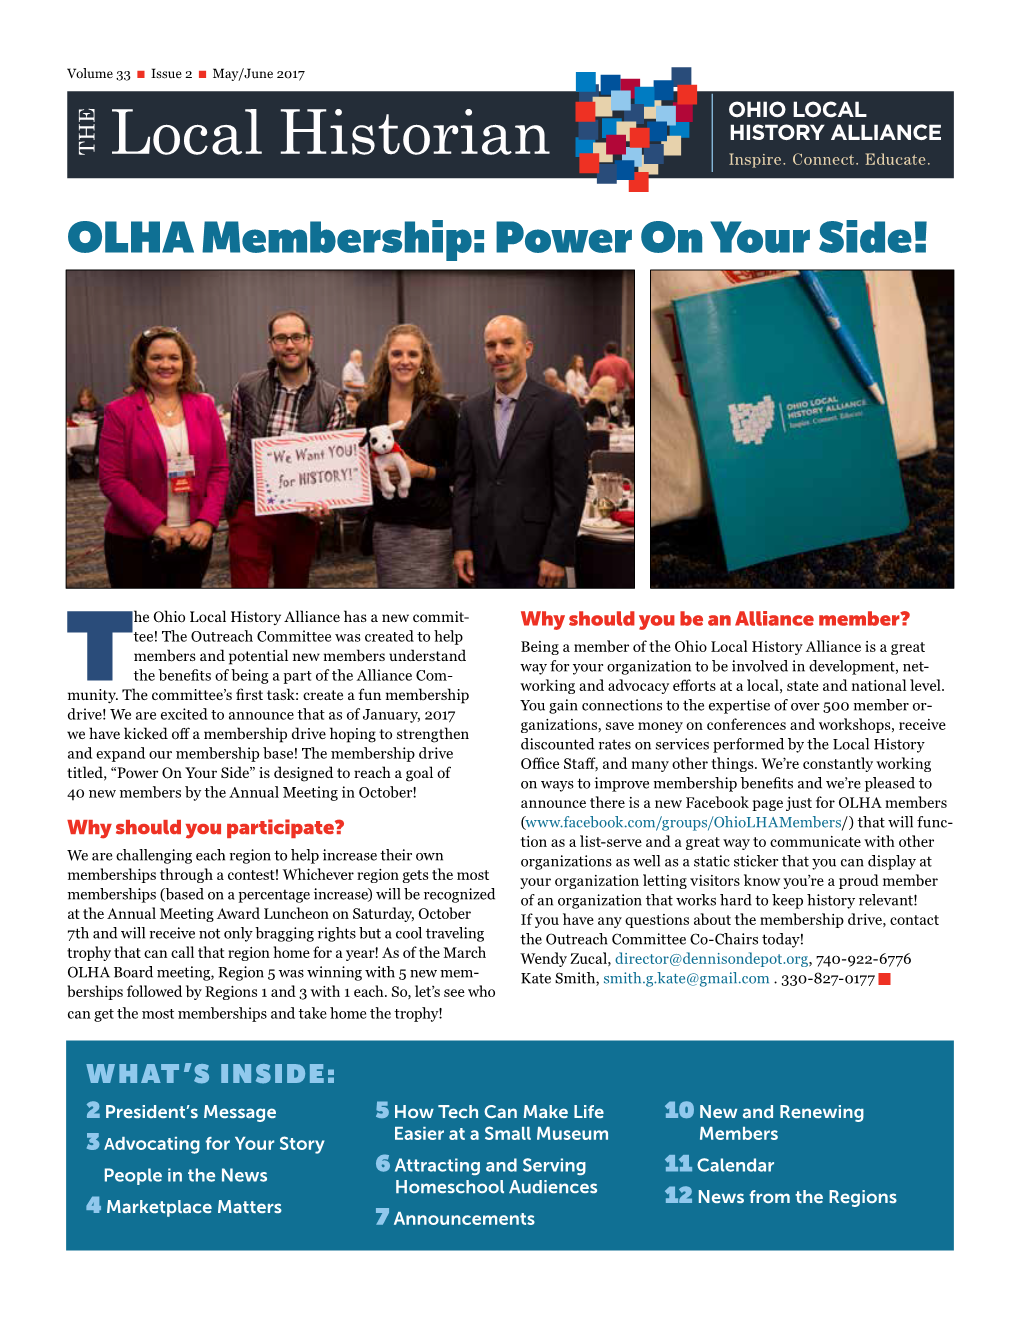 On Your Side! OLHA Membership: Power on Your Side!